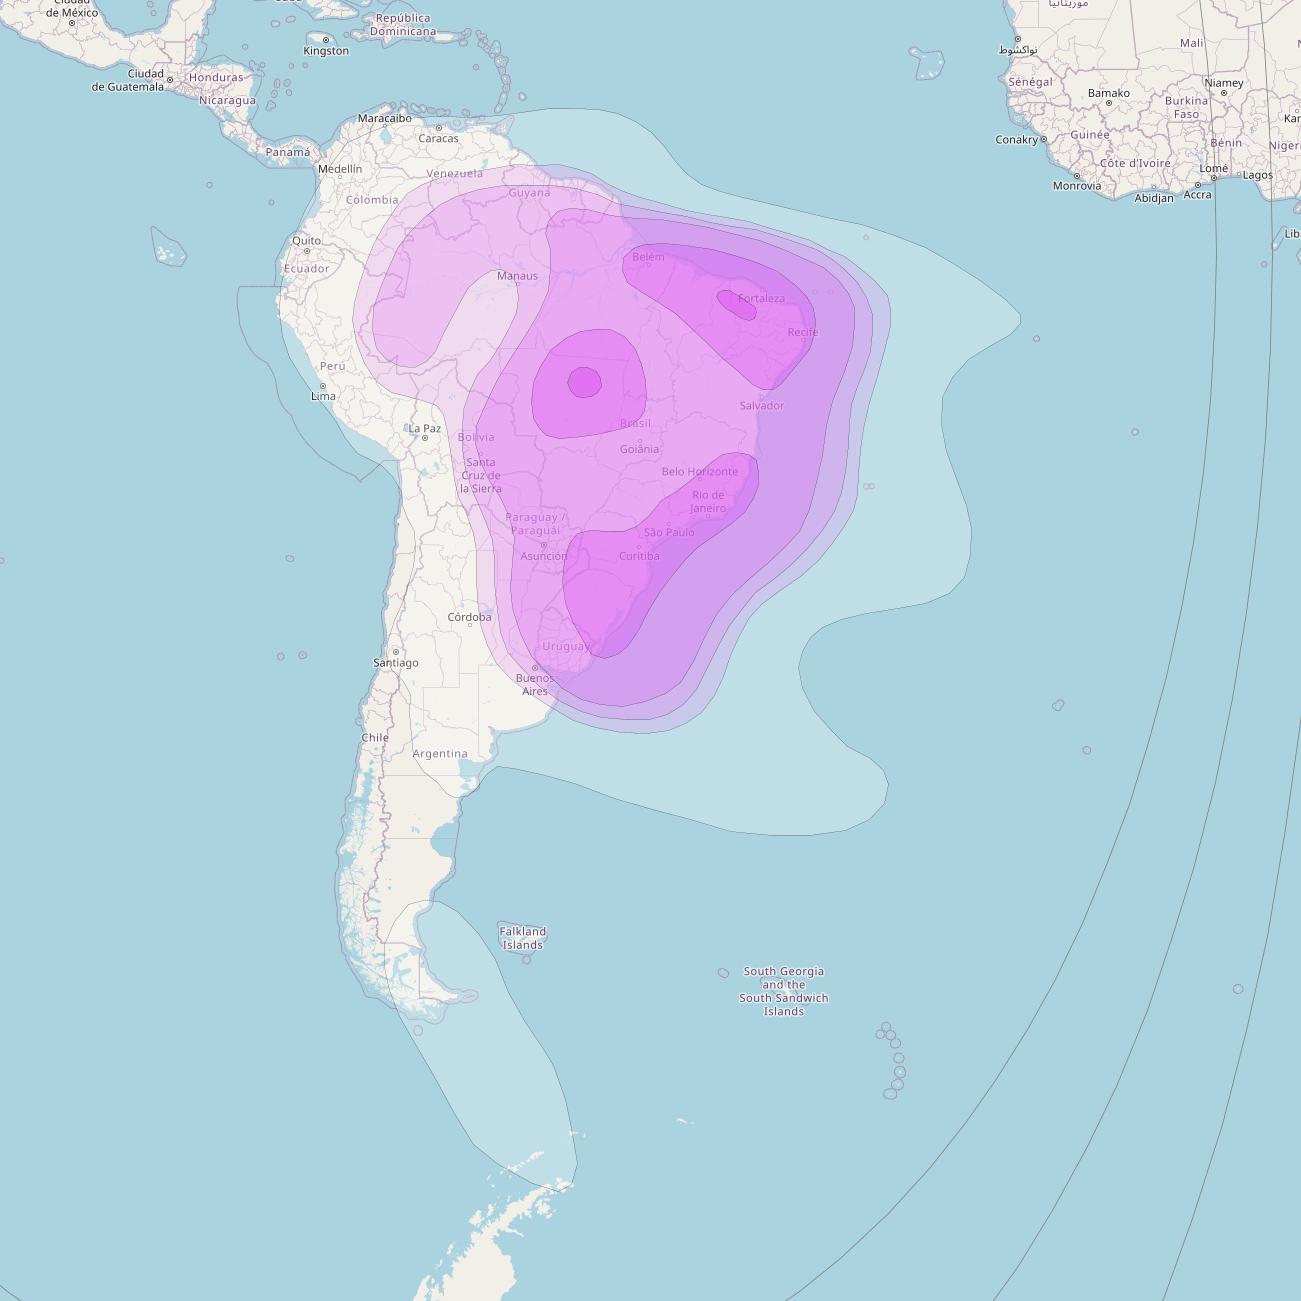 Star One D2 at 70° W downlink C-band Brazil and South America beam coverage map